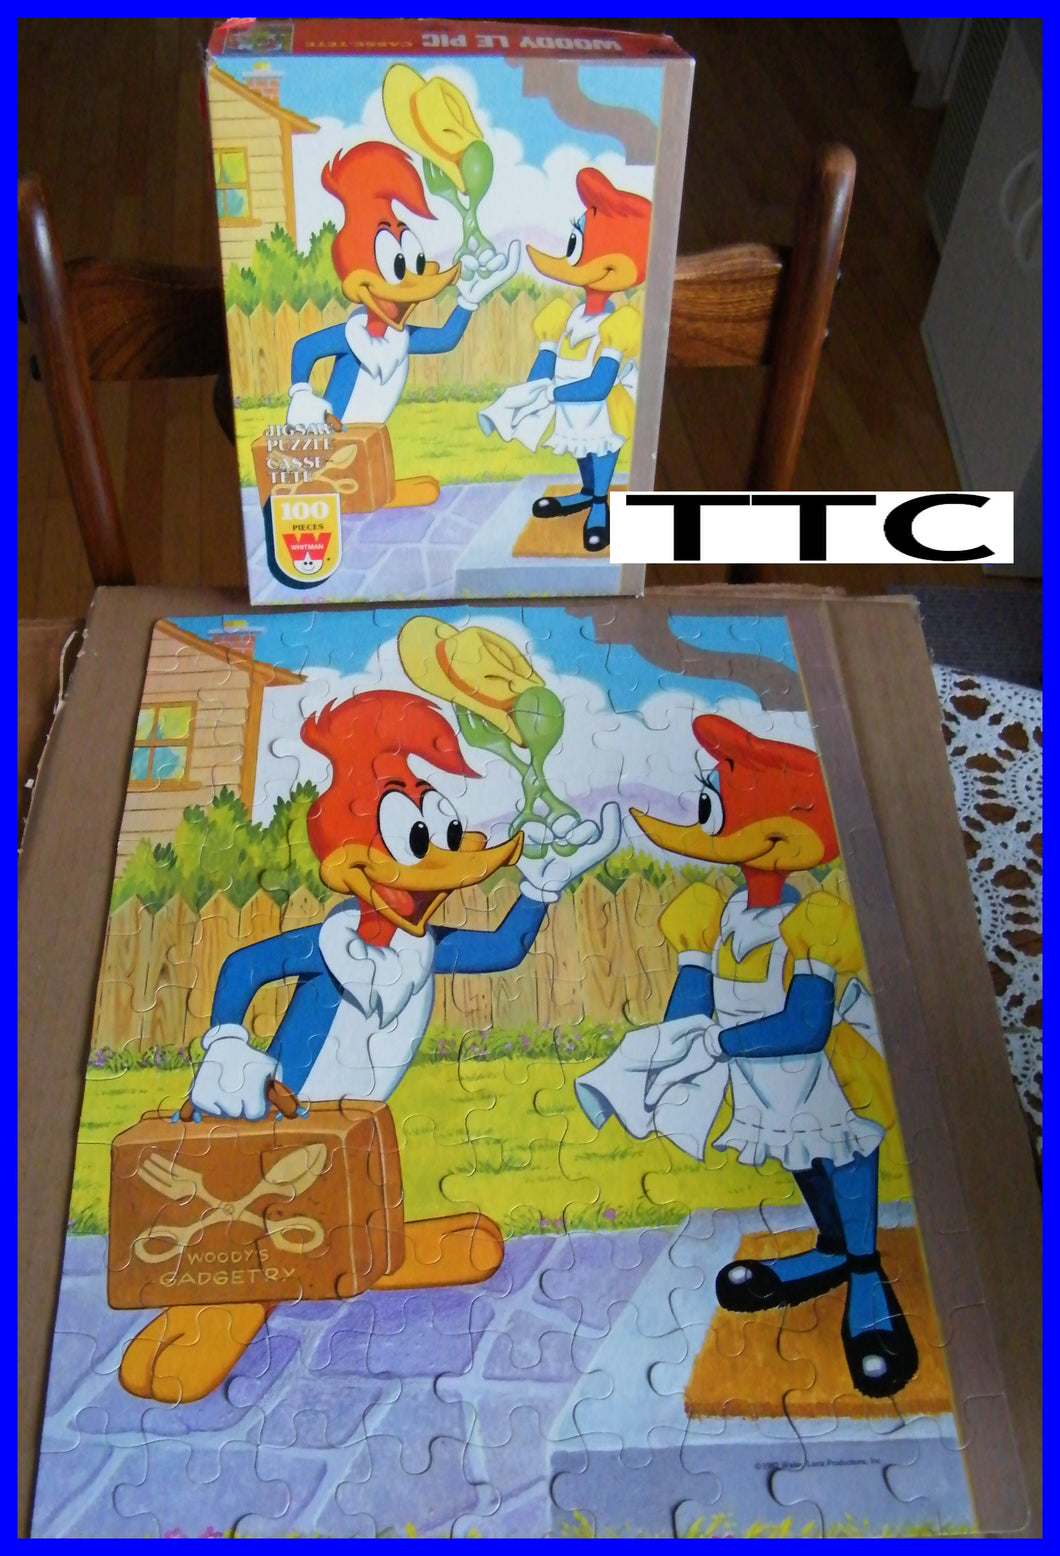 WOODY WOODPECKER - 100 mcx puzzle complete